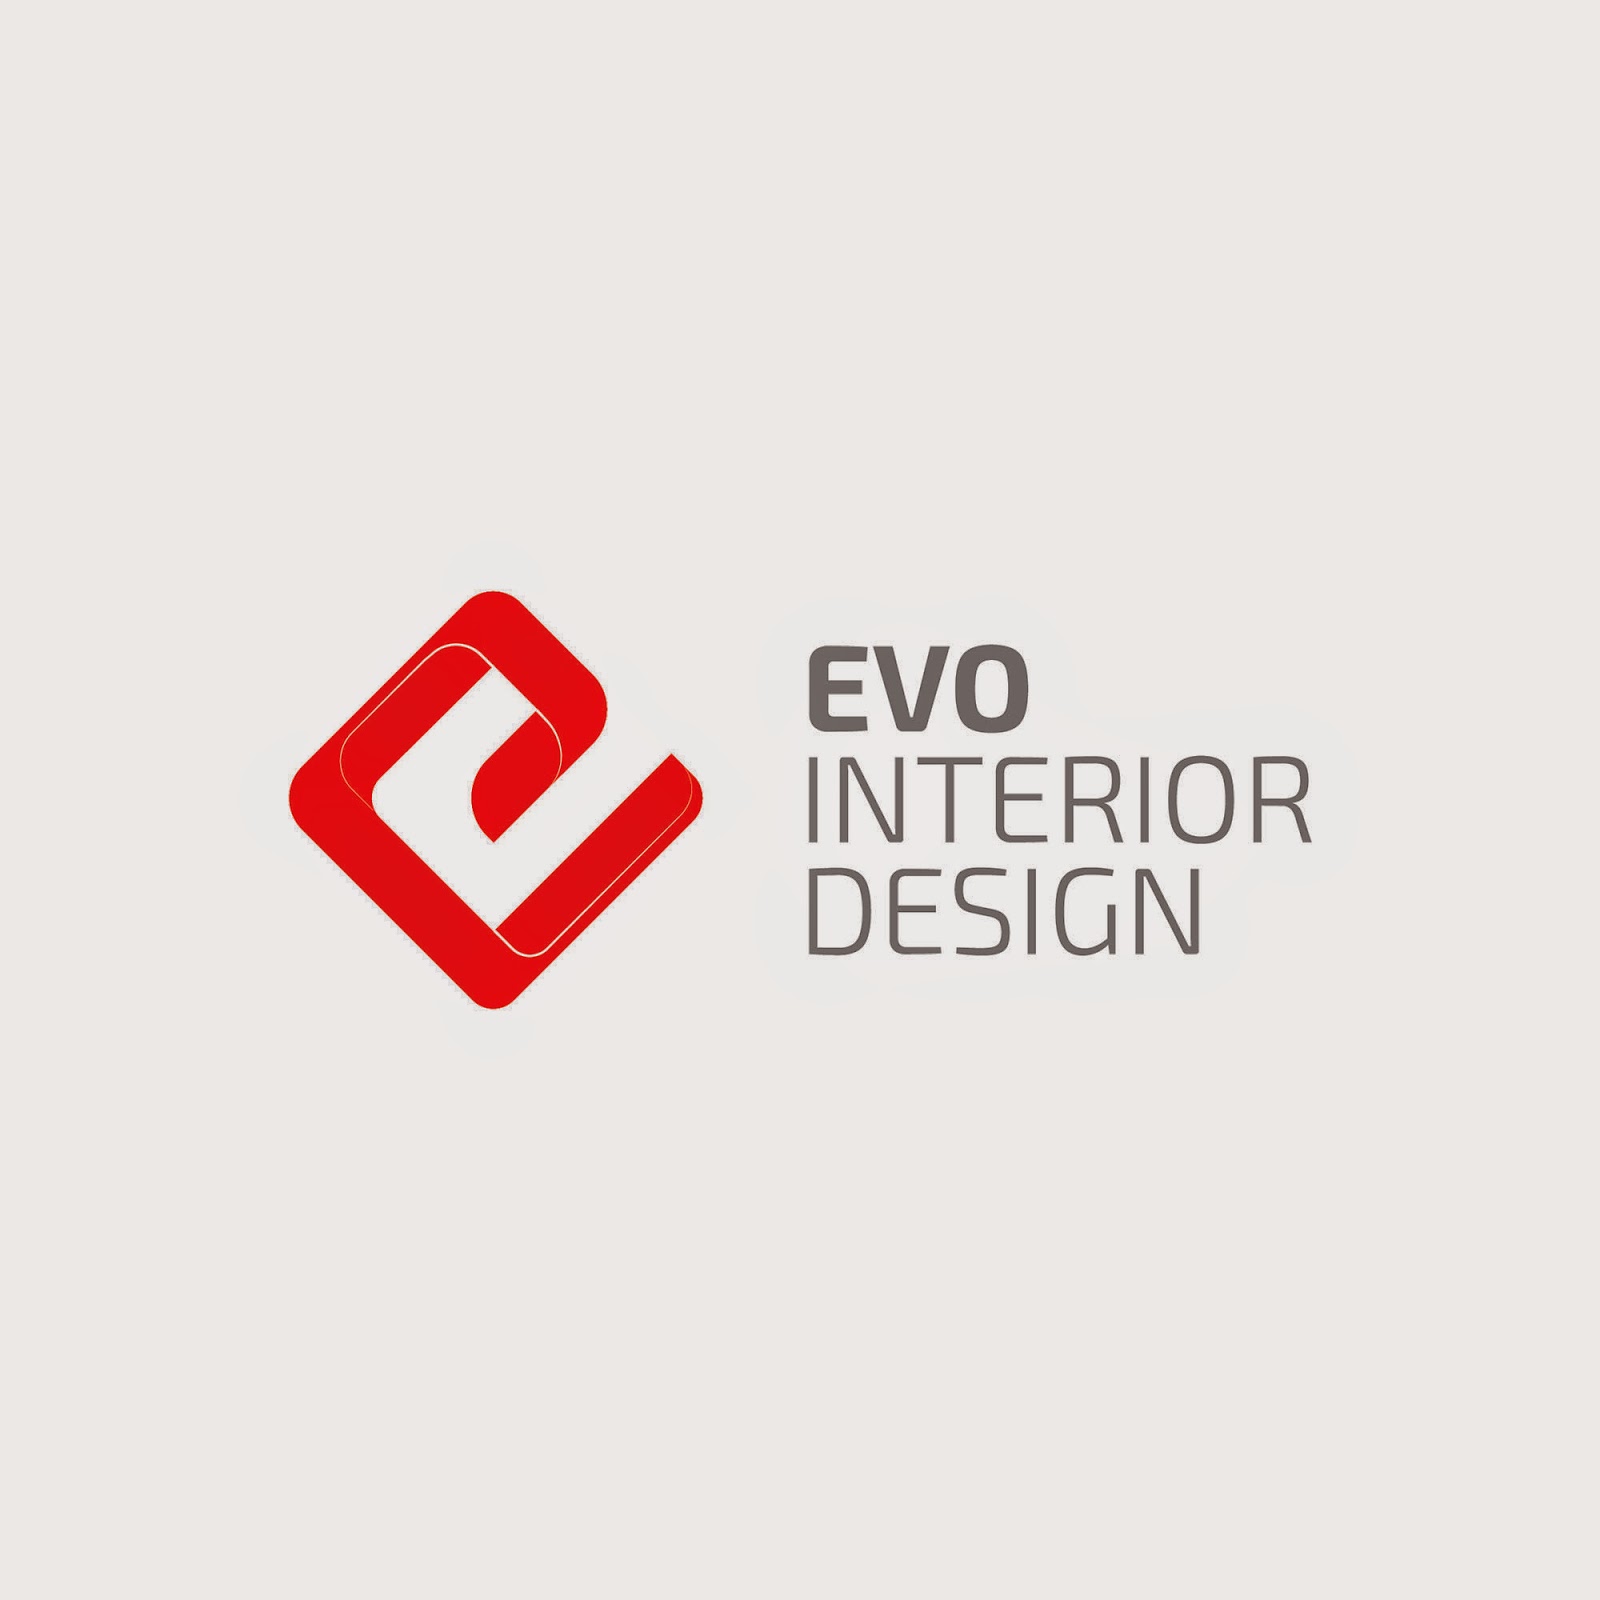 Another Interior Design Logos Ideas for your Inspiration ...